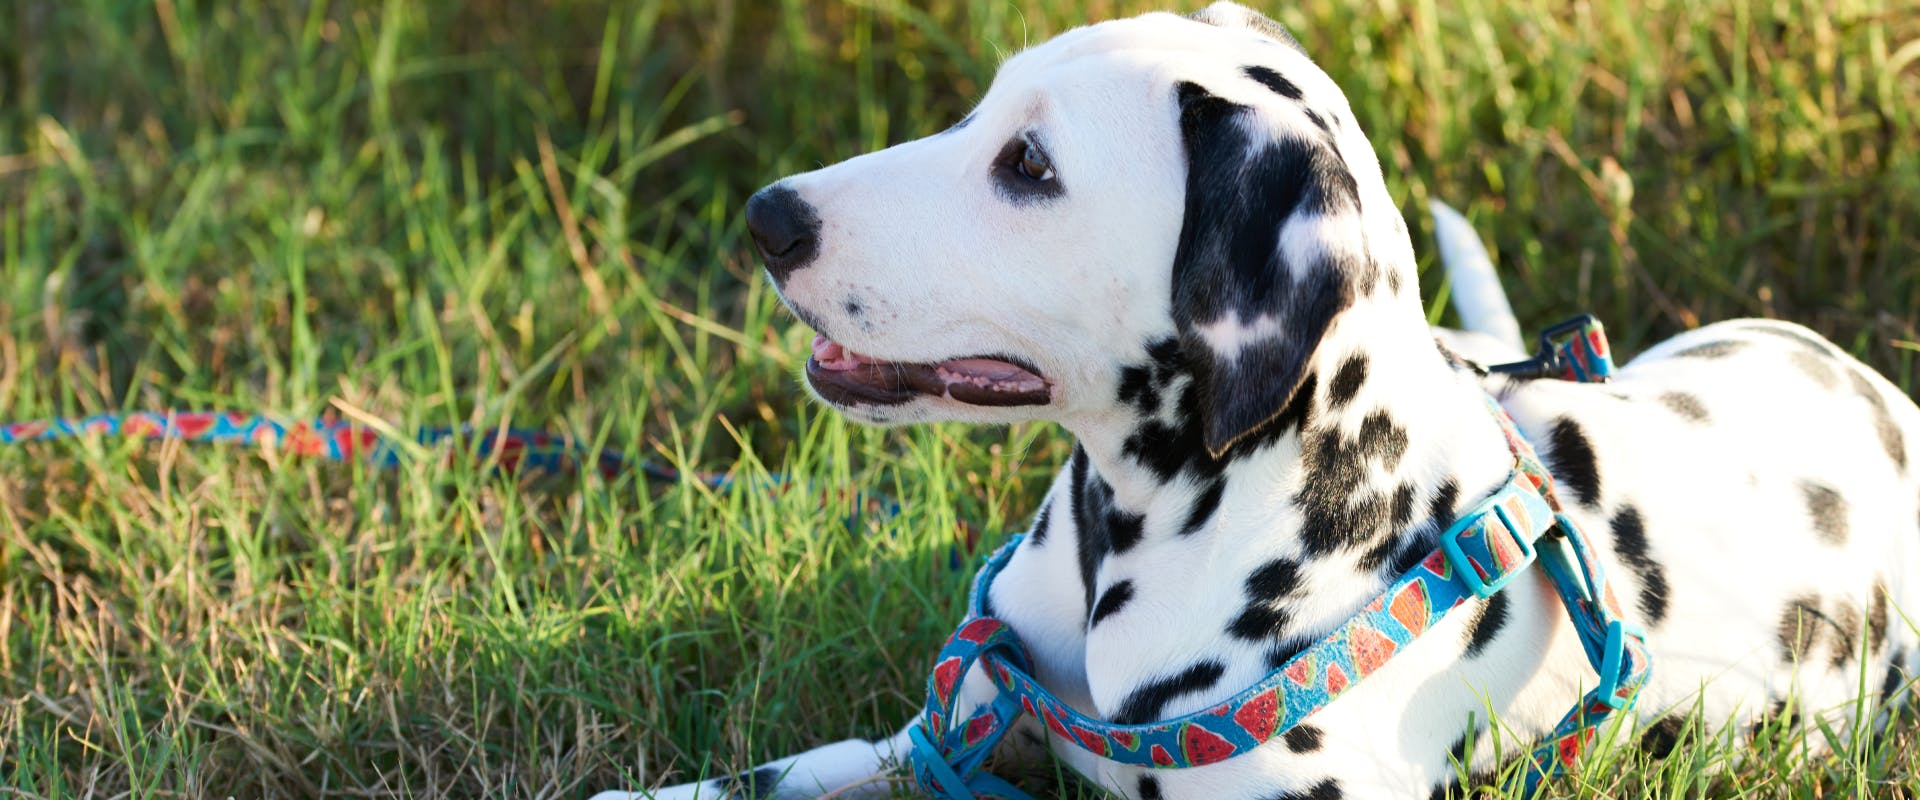 a Dalmatian puppy lying on a grass lawn with a colorful harness whilst receiving deaf dog training